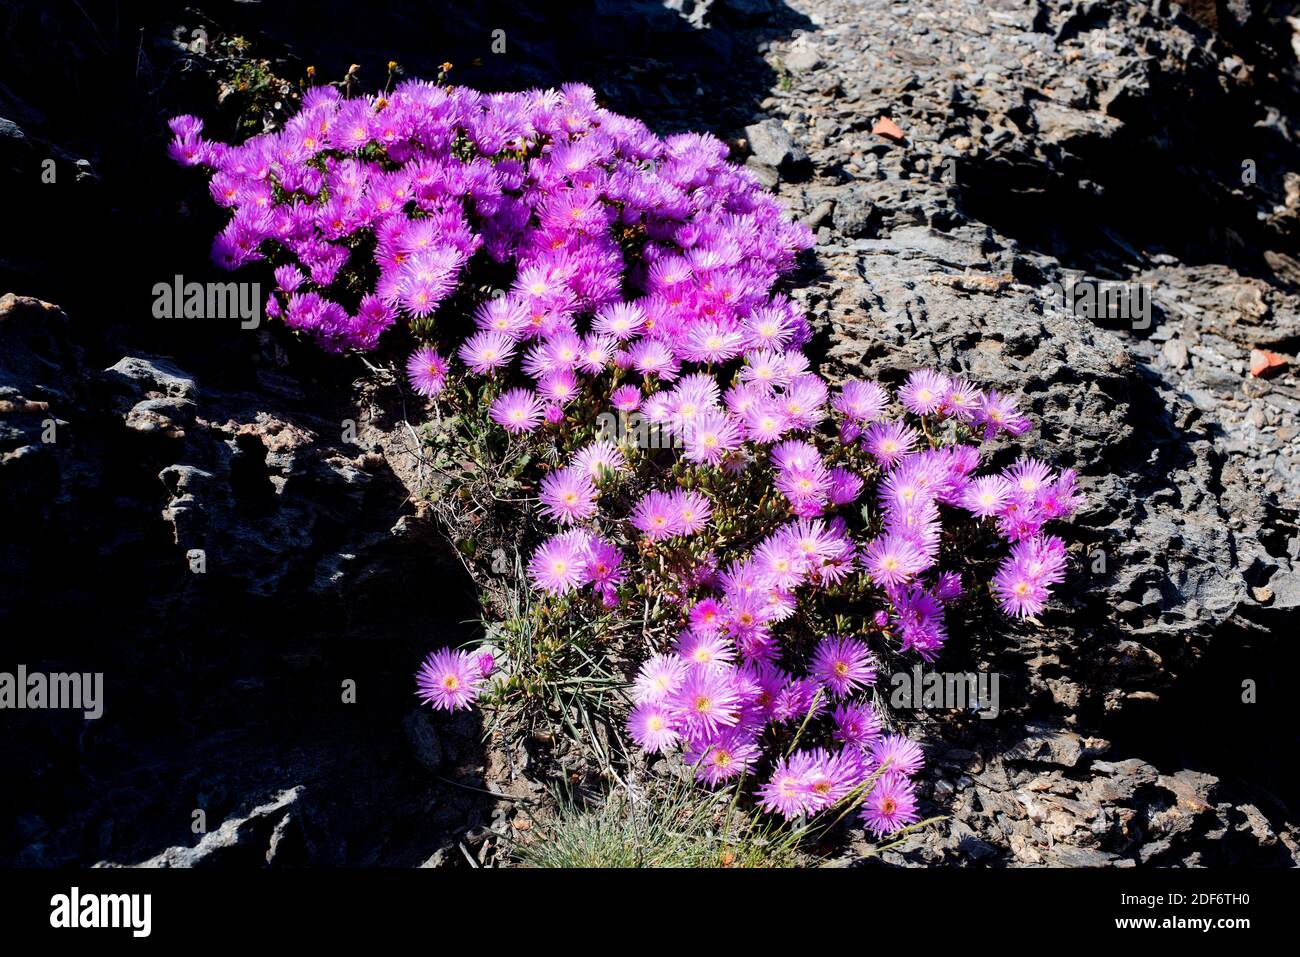 Trailing iceplant (Delosperma cooperi or Mesembryanthemum cooperi) is a prostrate plant native to South Africa and naturalized in Mediterranean Stock Photo